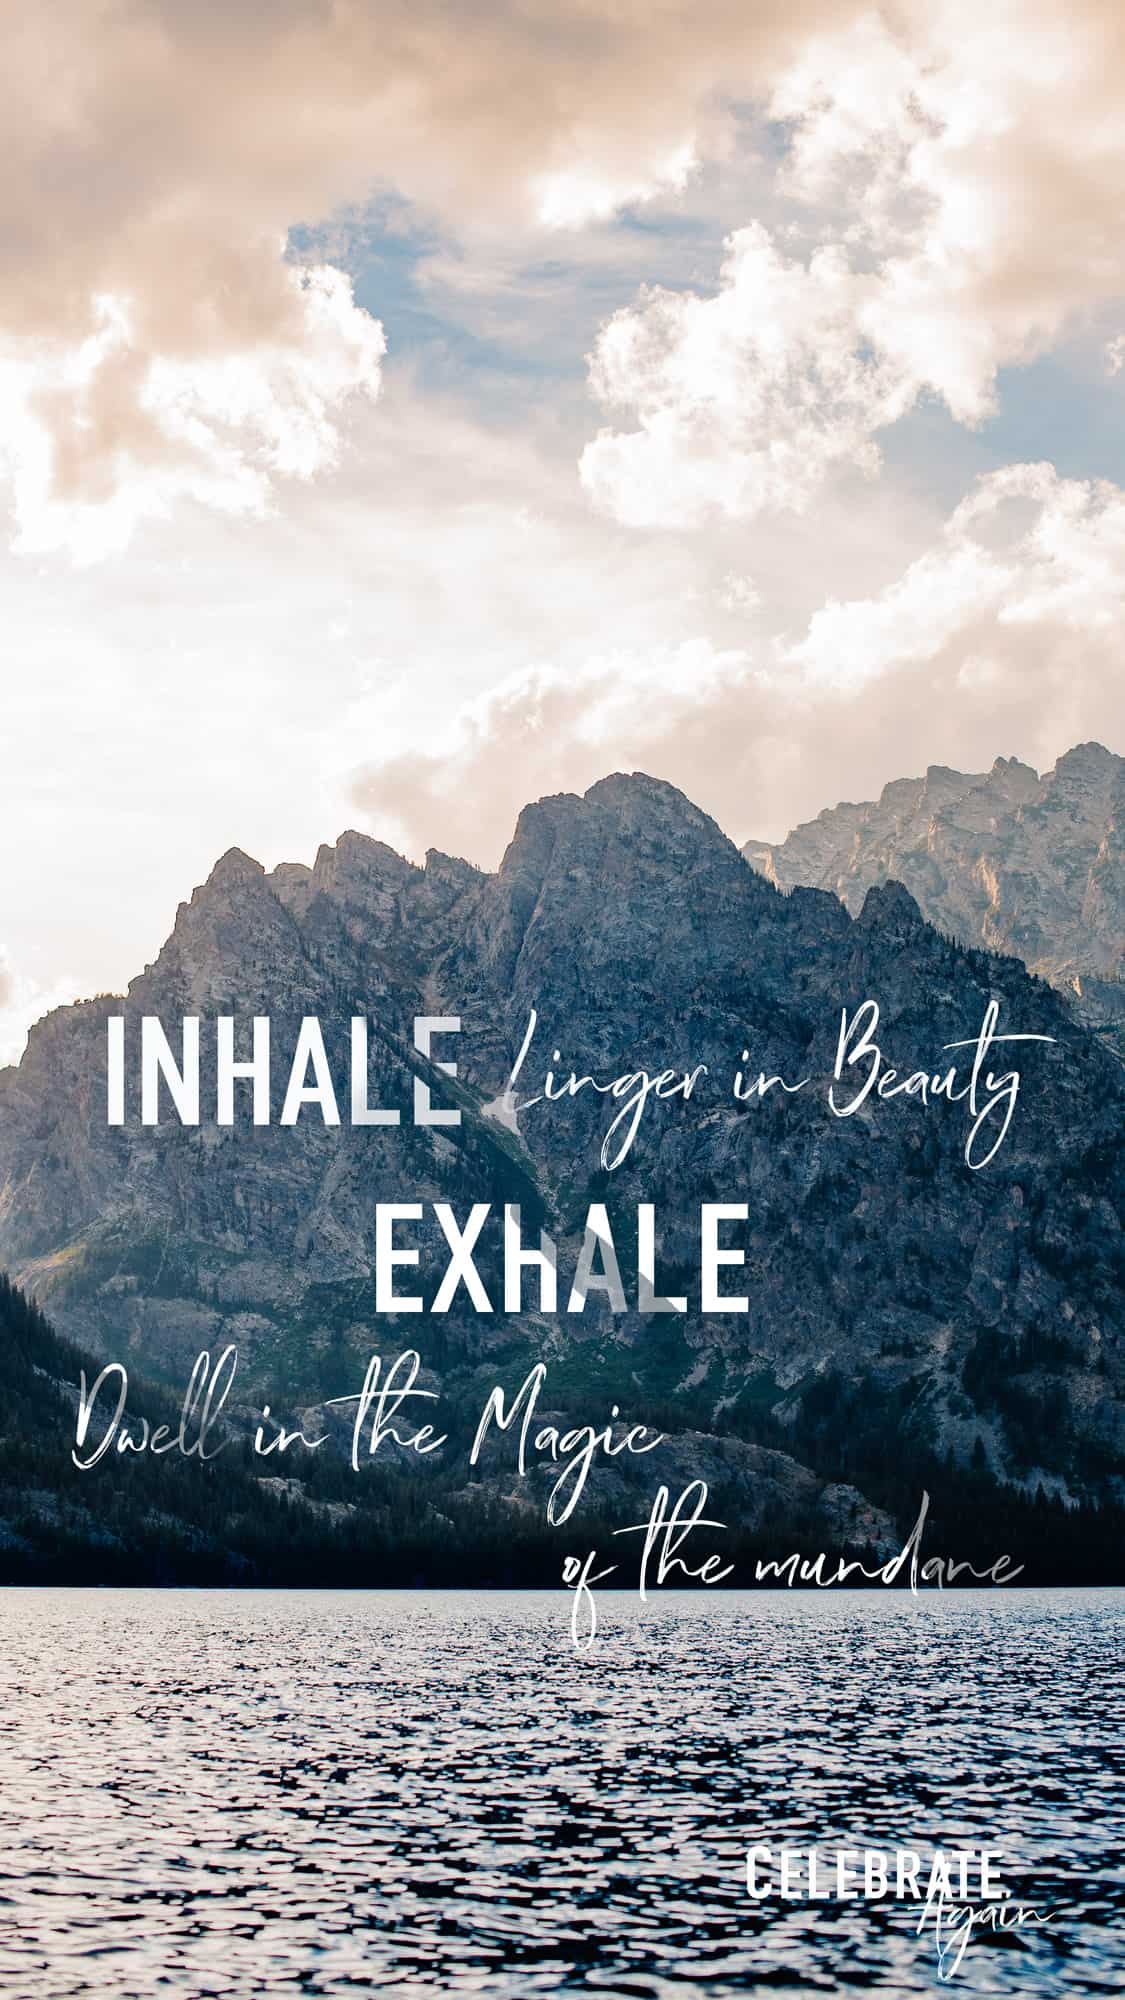 view of an alpine lake mountain side with text that says "Inhale linger in the beauty exhale dwell in the magic of the mundane"